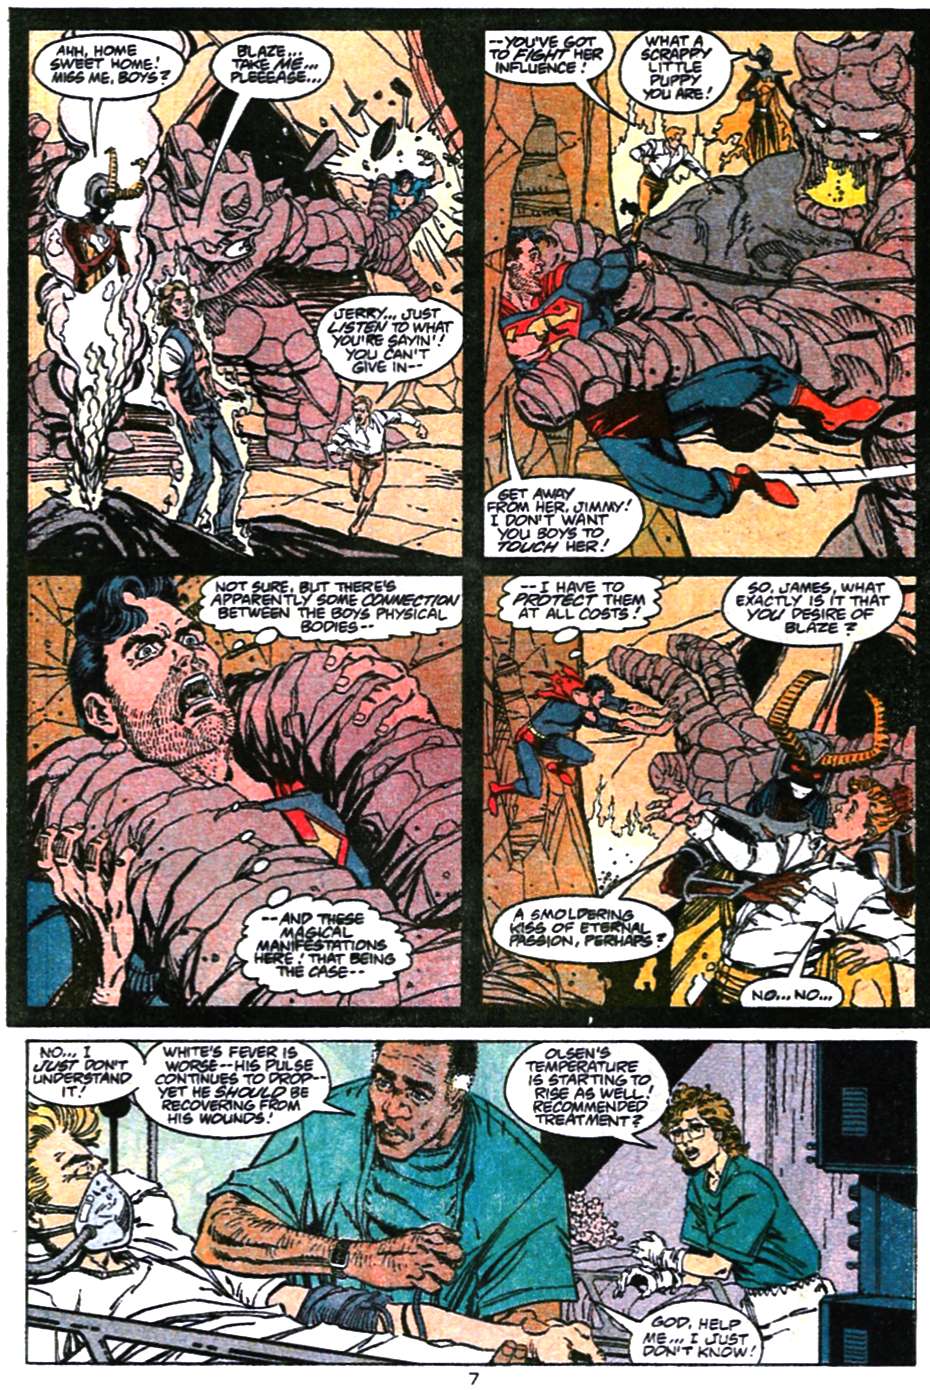 Adventures of Superman (1987) 470 Page 7